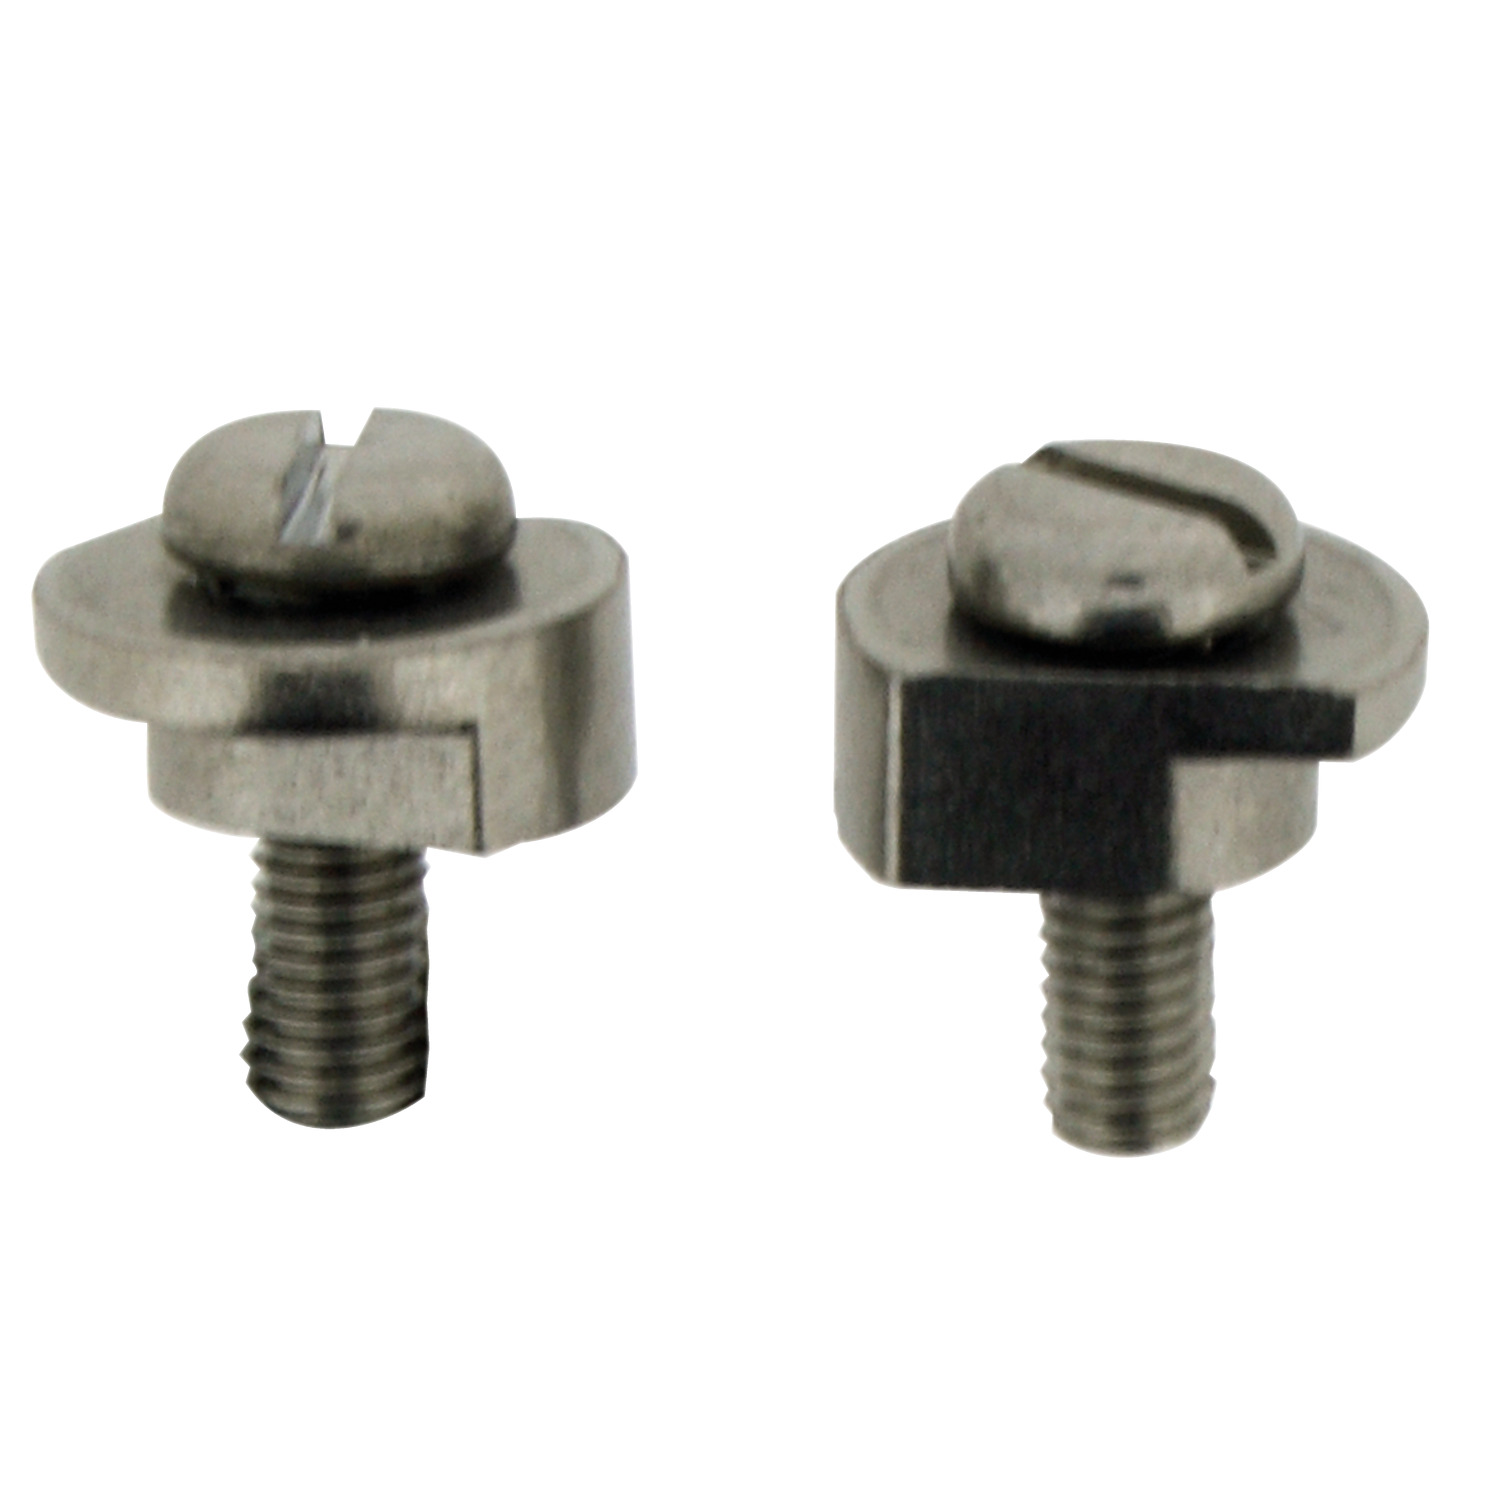 P0292.079 P0292.006 Clamp cleats 